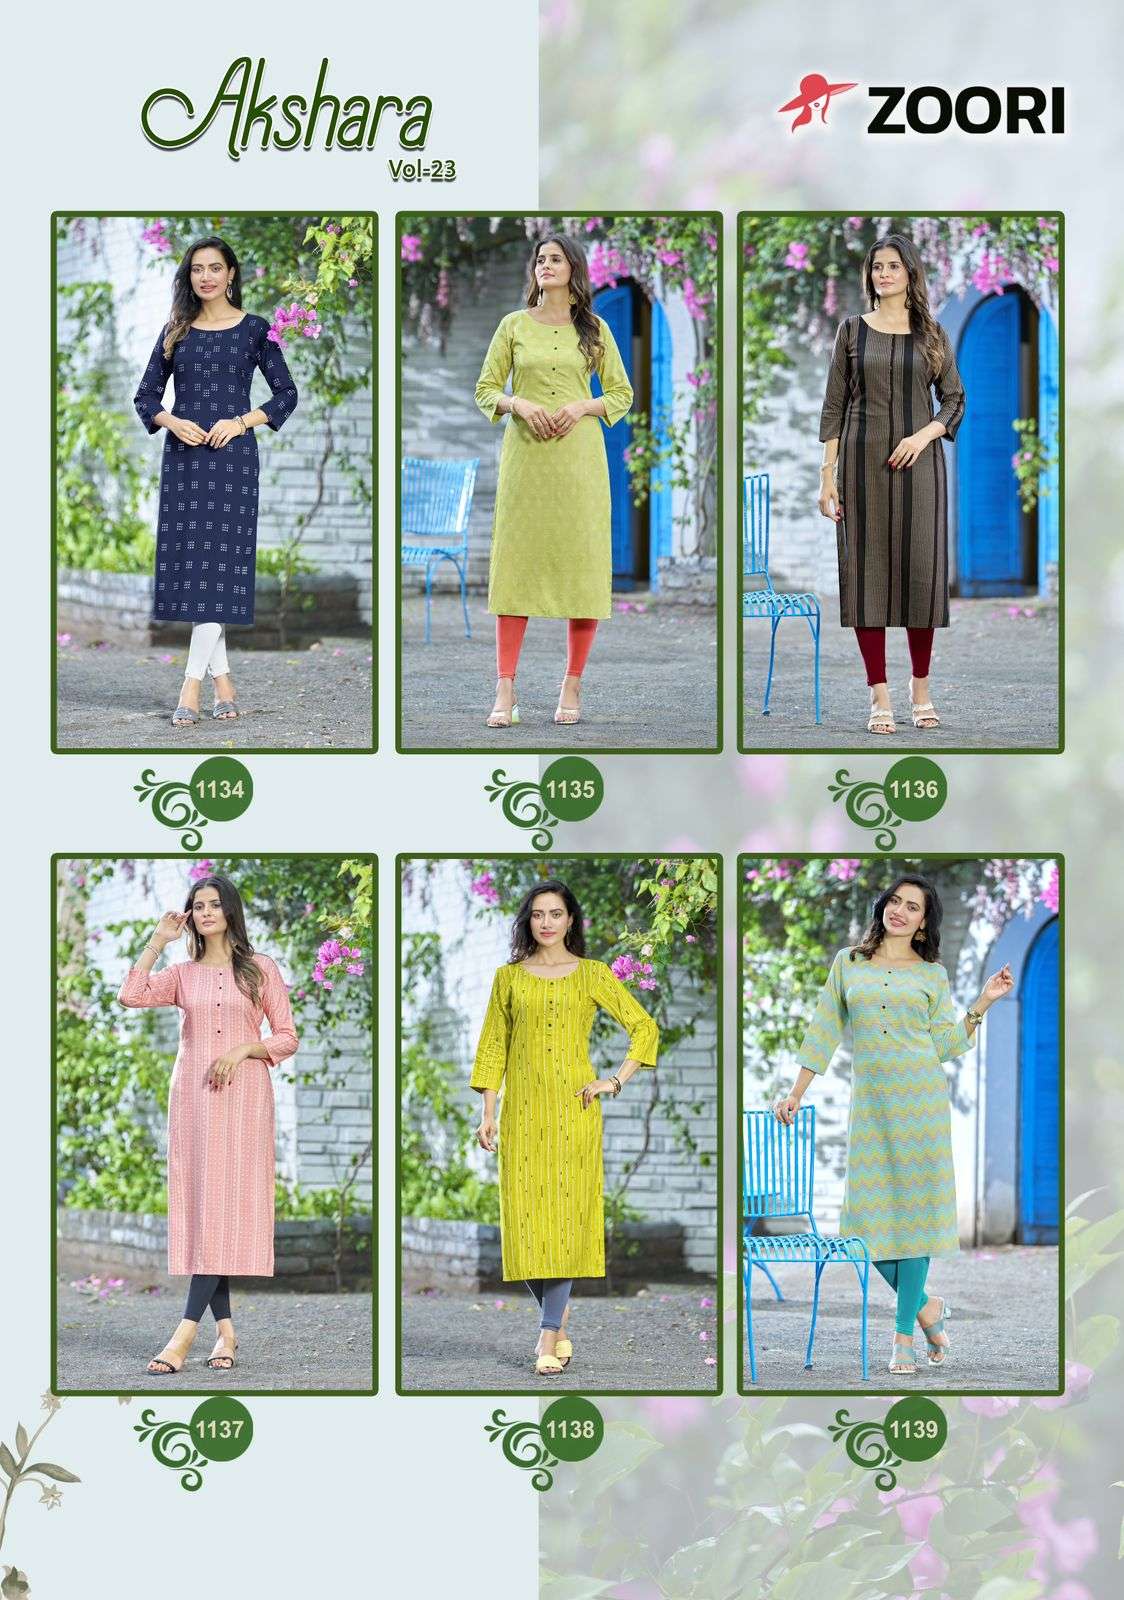 Akshara Vol-23 By Zoori 1134 To 1139 Series Designer Stylish Fancy Colorful Beautiful Party Wear & Ethnic Wear Collection Rayon Print Kurtis At Wholesale Price